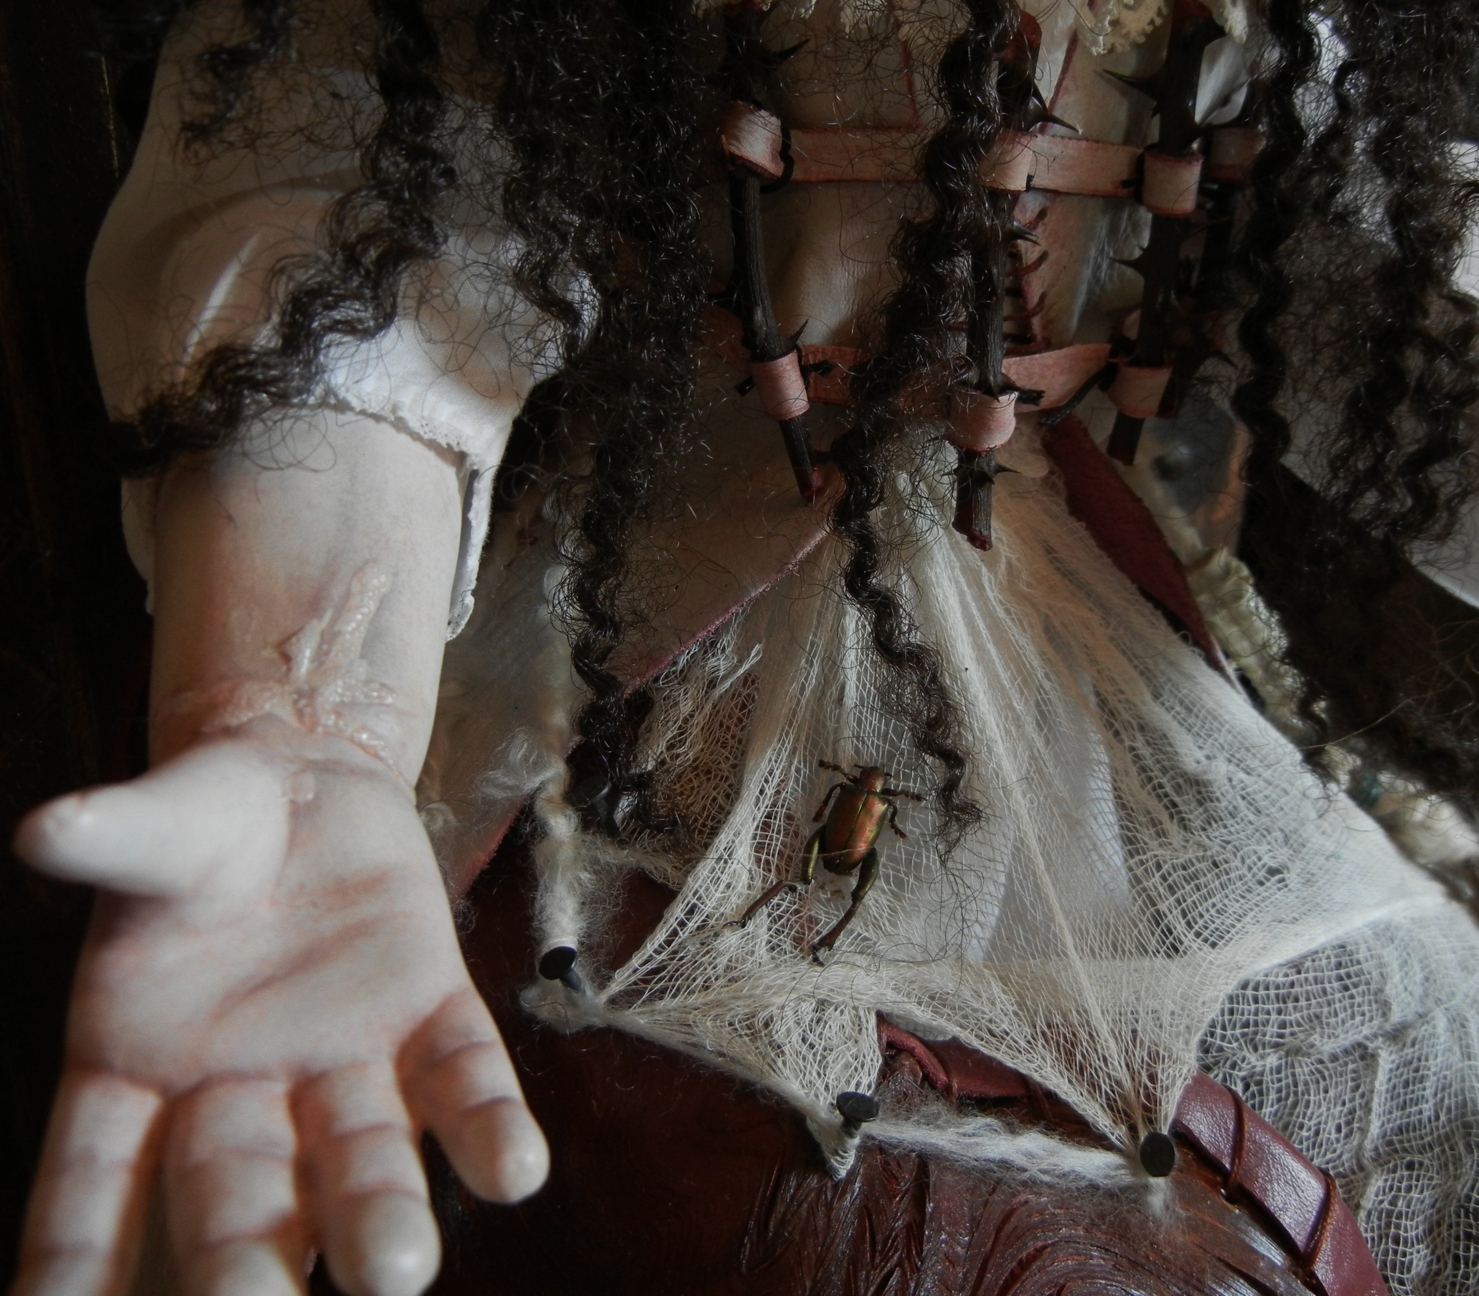 close-up detail of vinyl doll arm with cut wrist suicide scar wearing white gauze